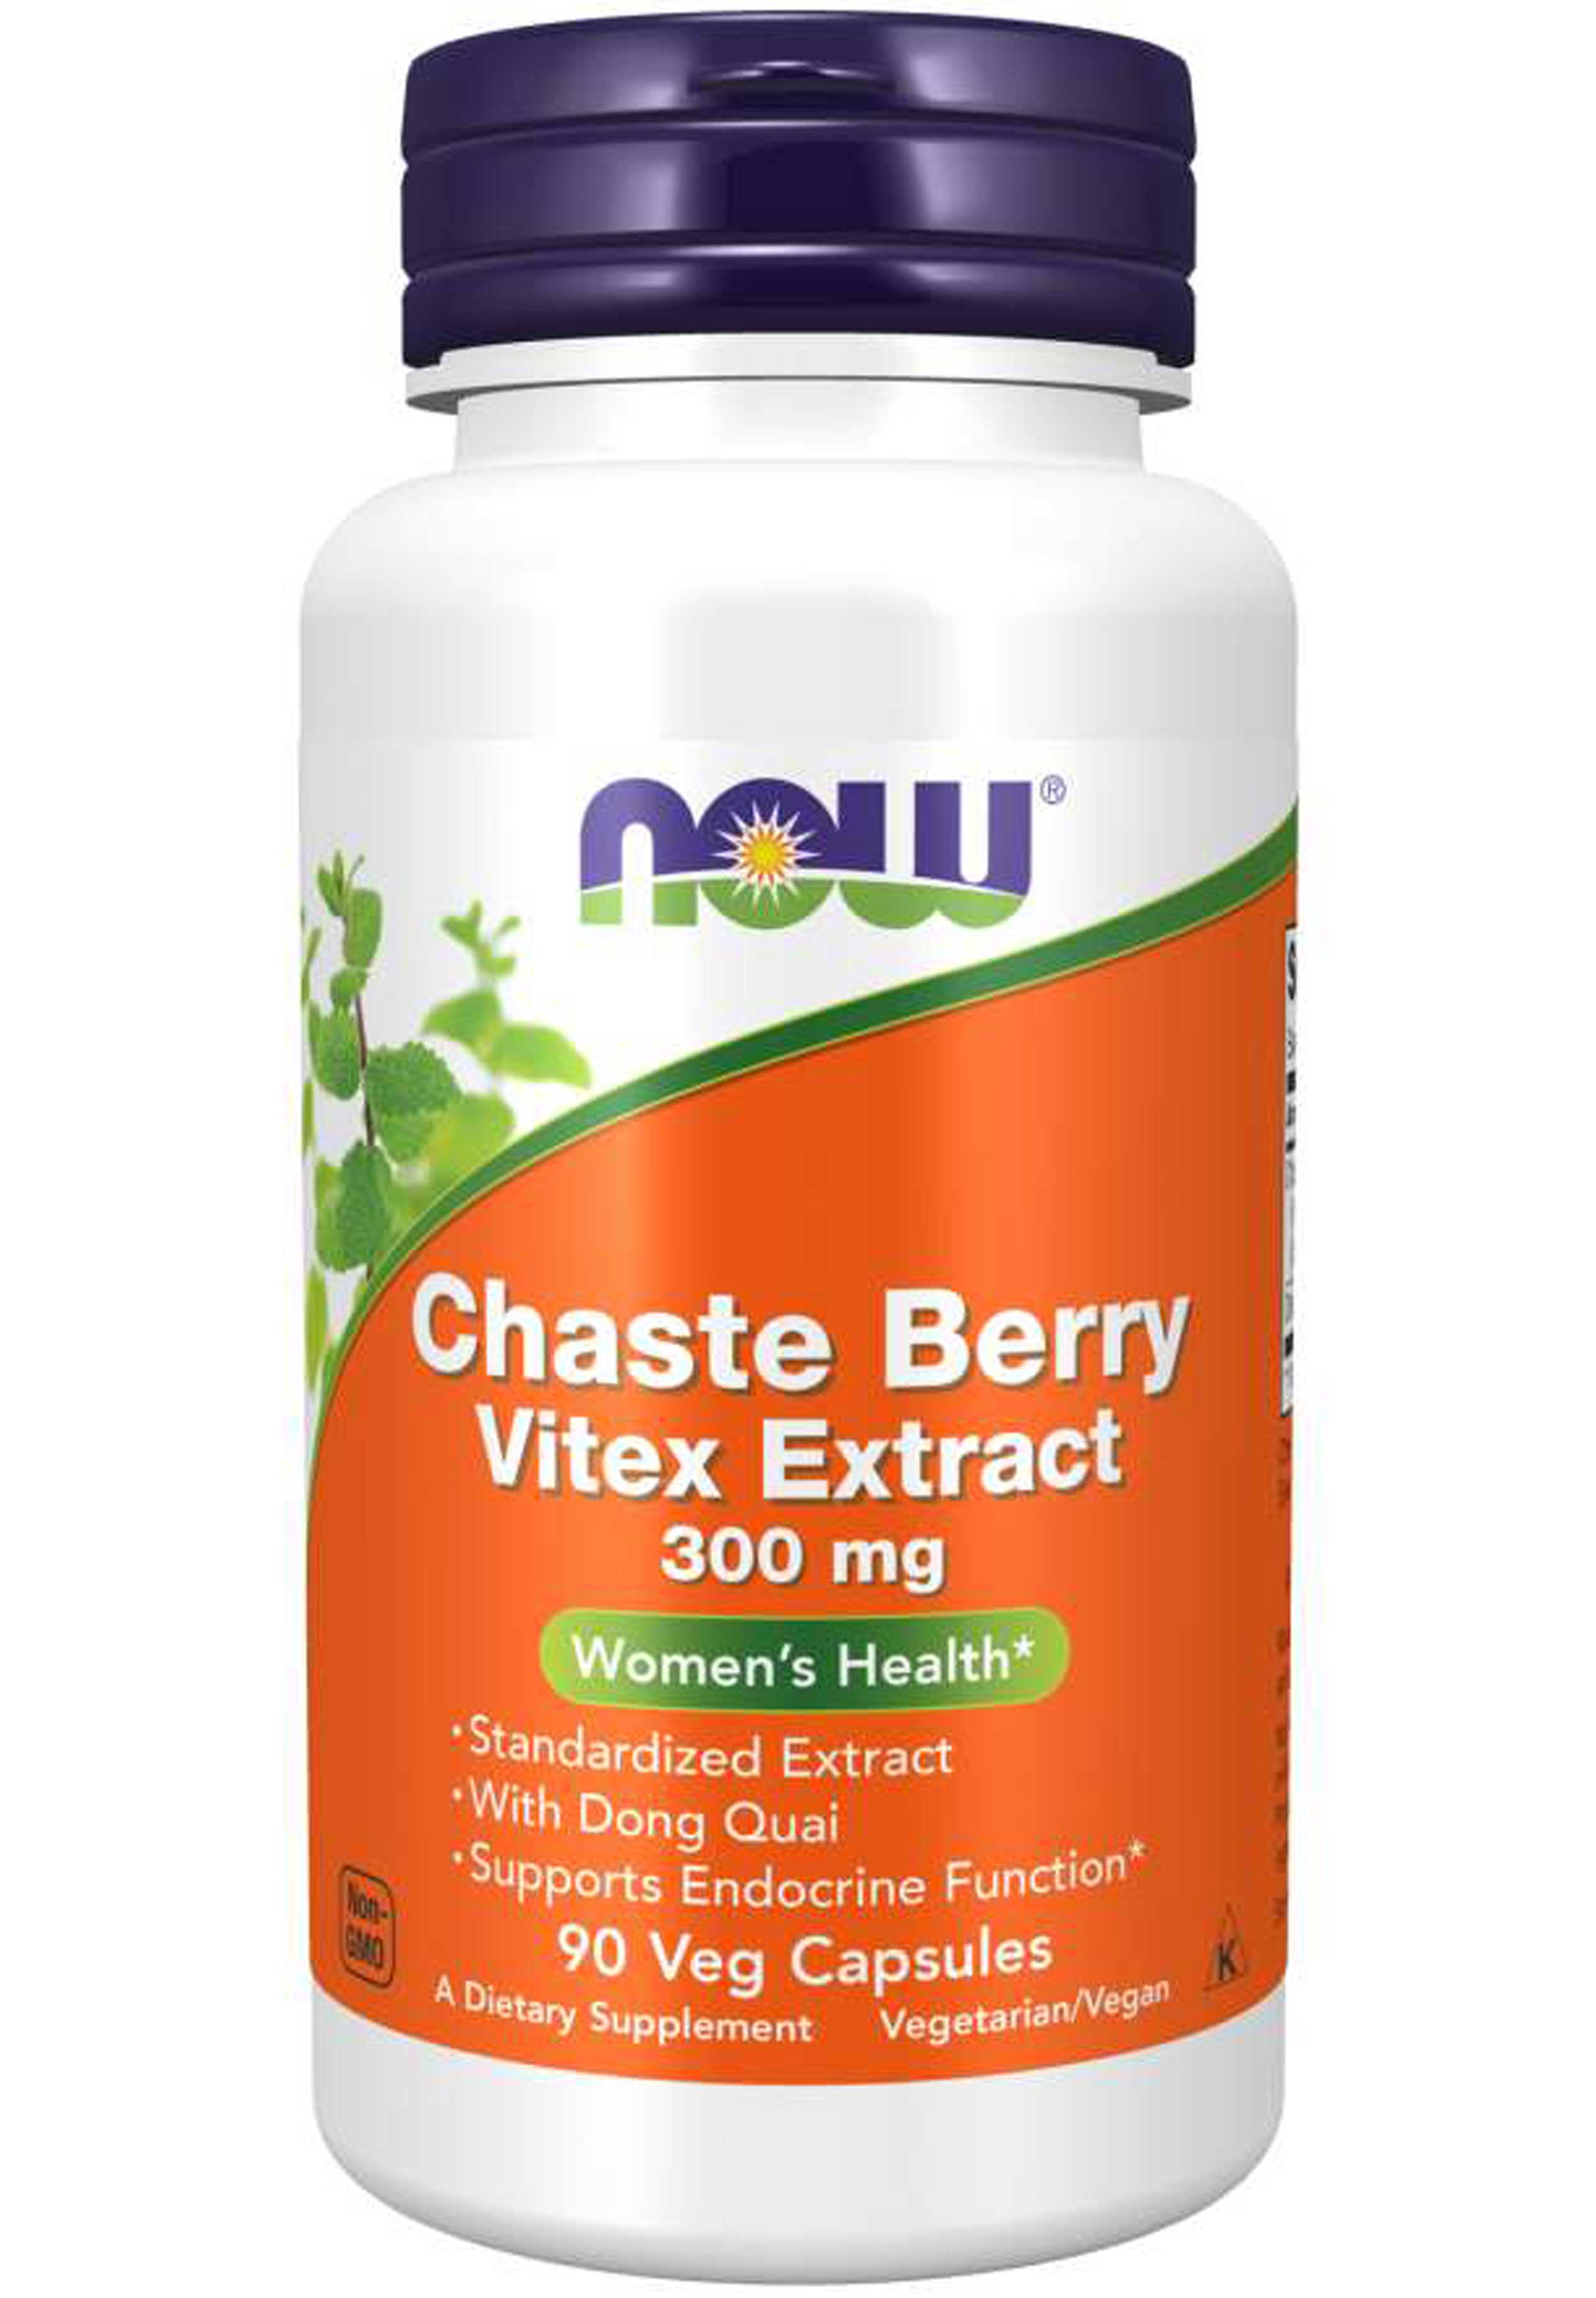 NOW Chaste Berry Vitex Extract 300 mg